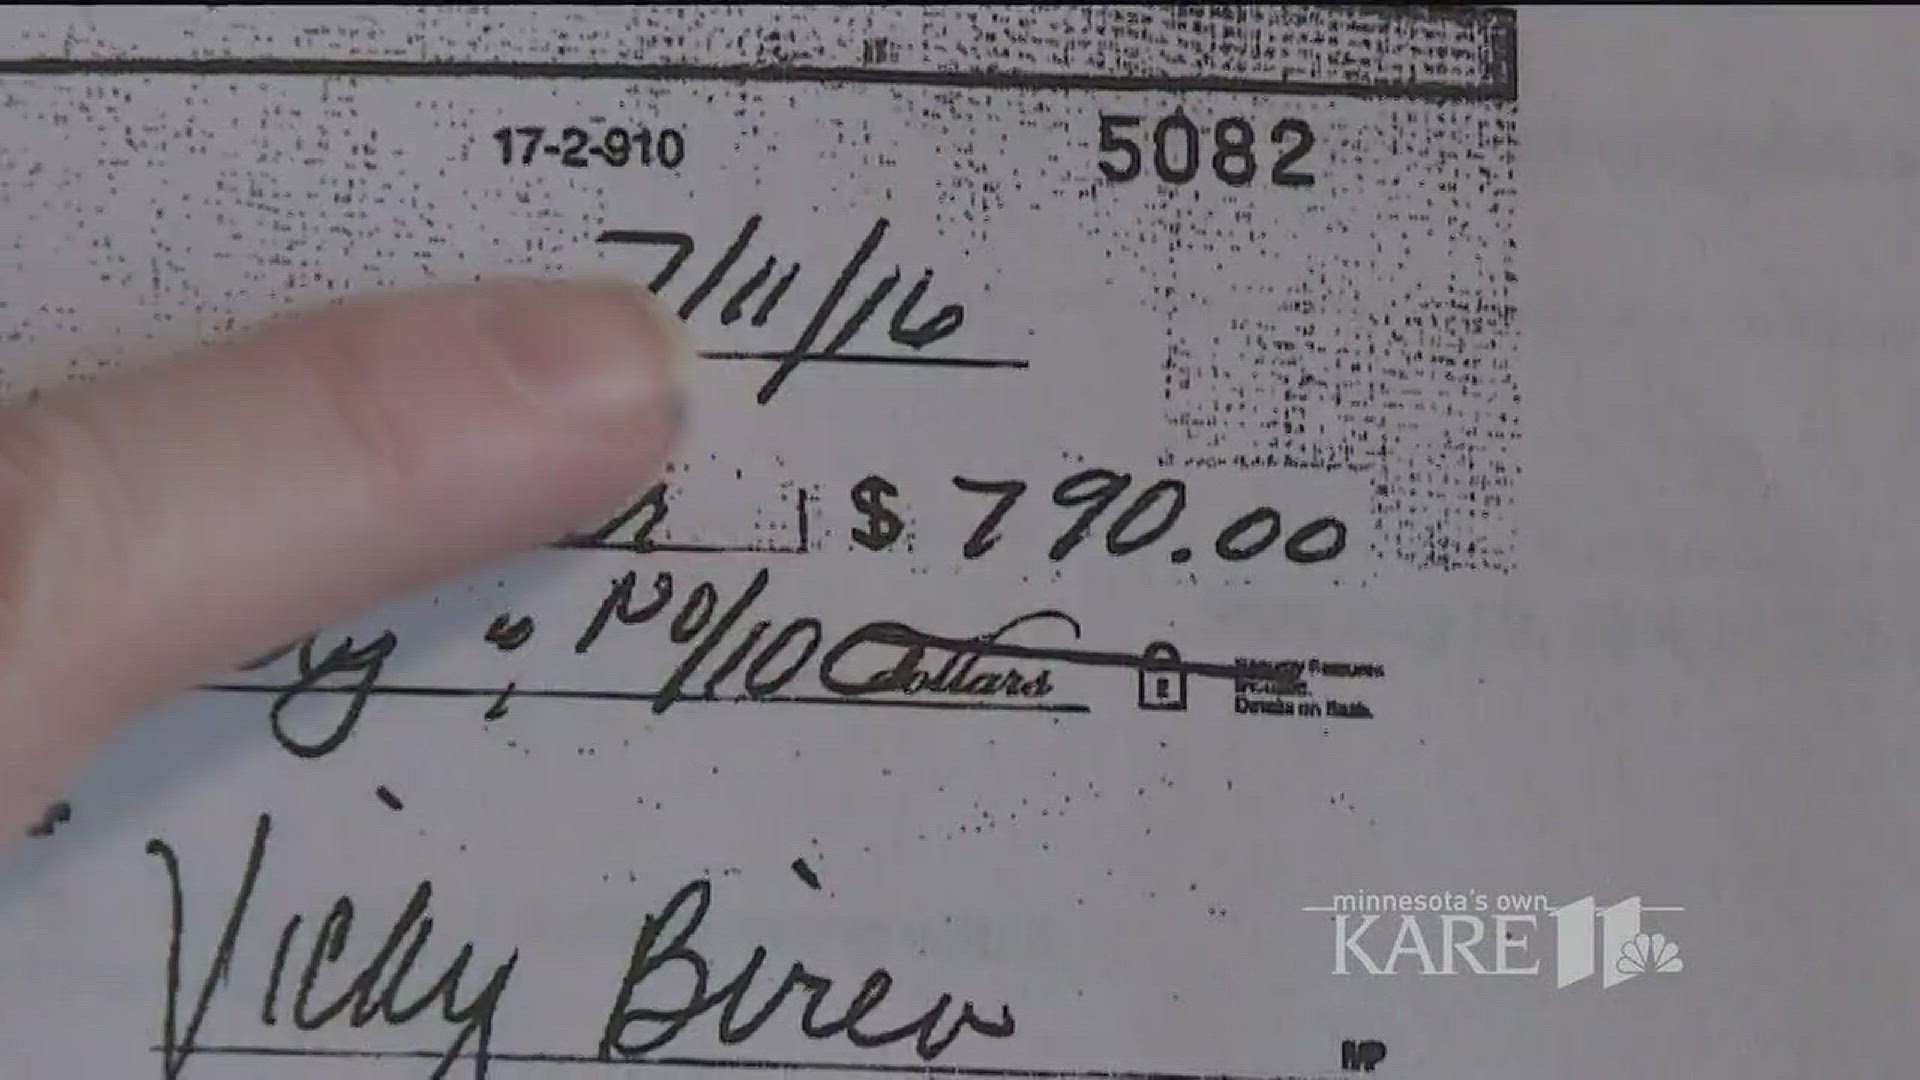 A school and youth group fundraising company exposed by KARE 11 for allegedly ripping off local businesses is now forbidden from operating in Minnesota. It's the result of a KARE 11 investigation and action by the Minnesota Attorney General. http://kare11